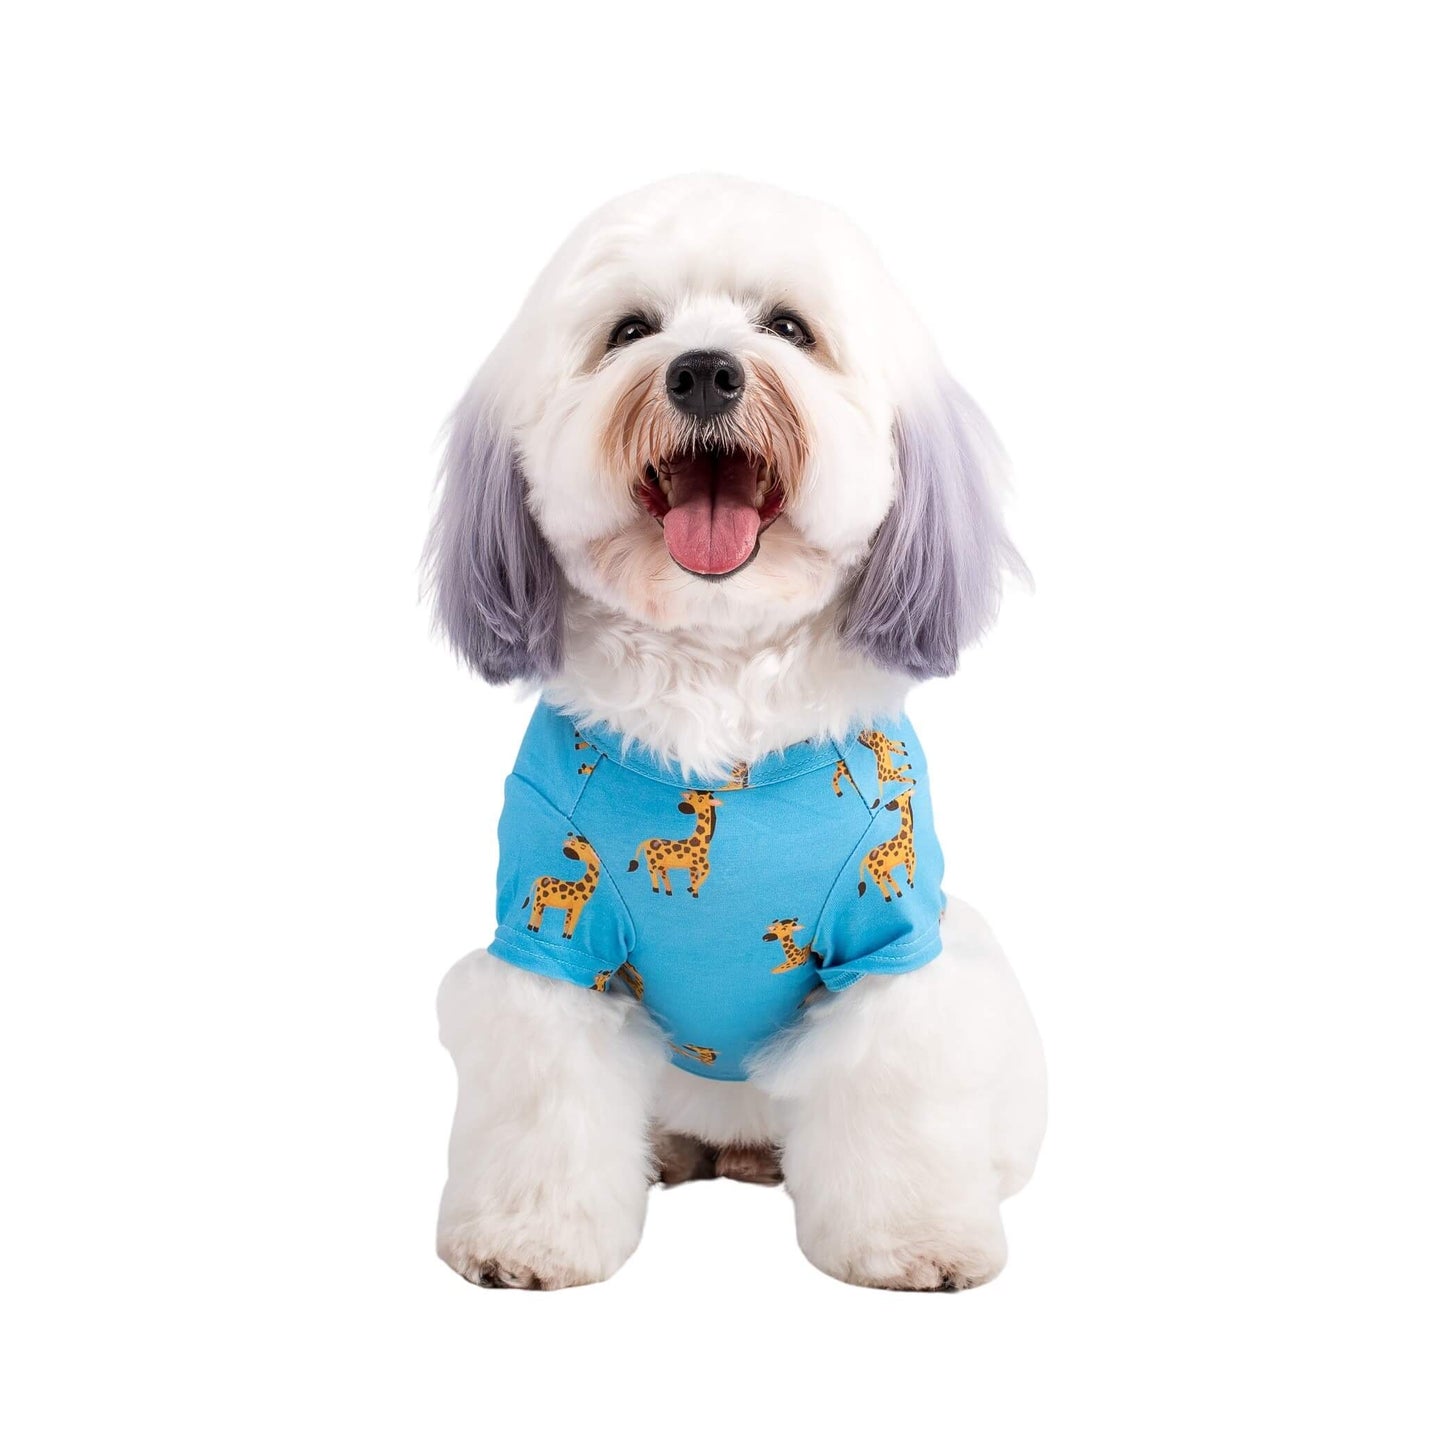 A cavoodle wearing Gerald the Giraffe dog pyjamas made by Vibrant Hound. The dog pyjamas are blue, with girrafes printed on them.